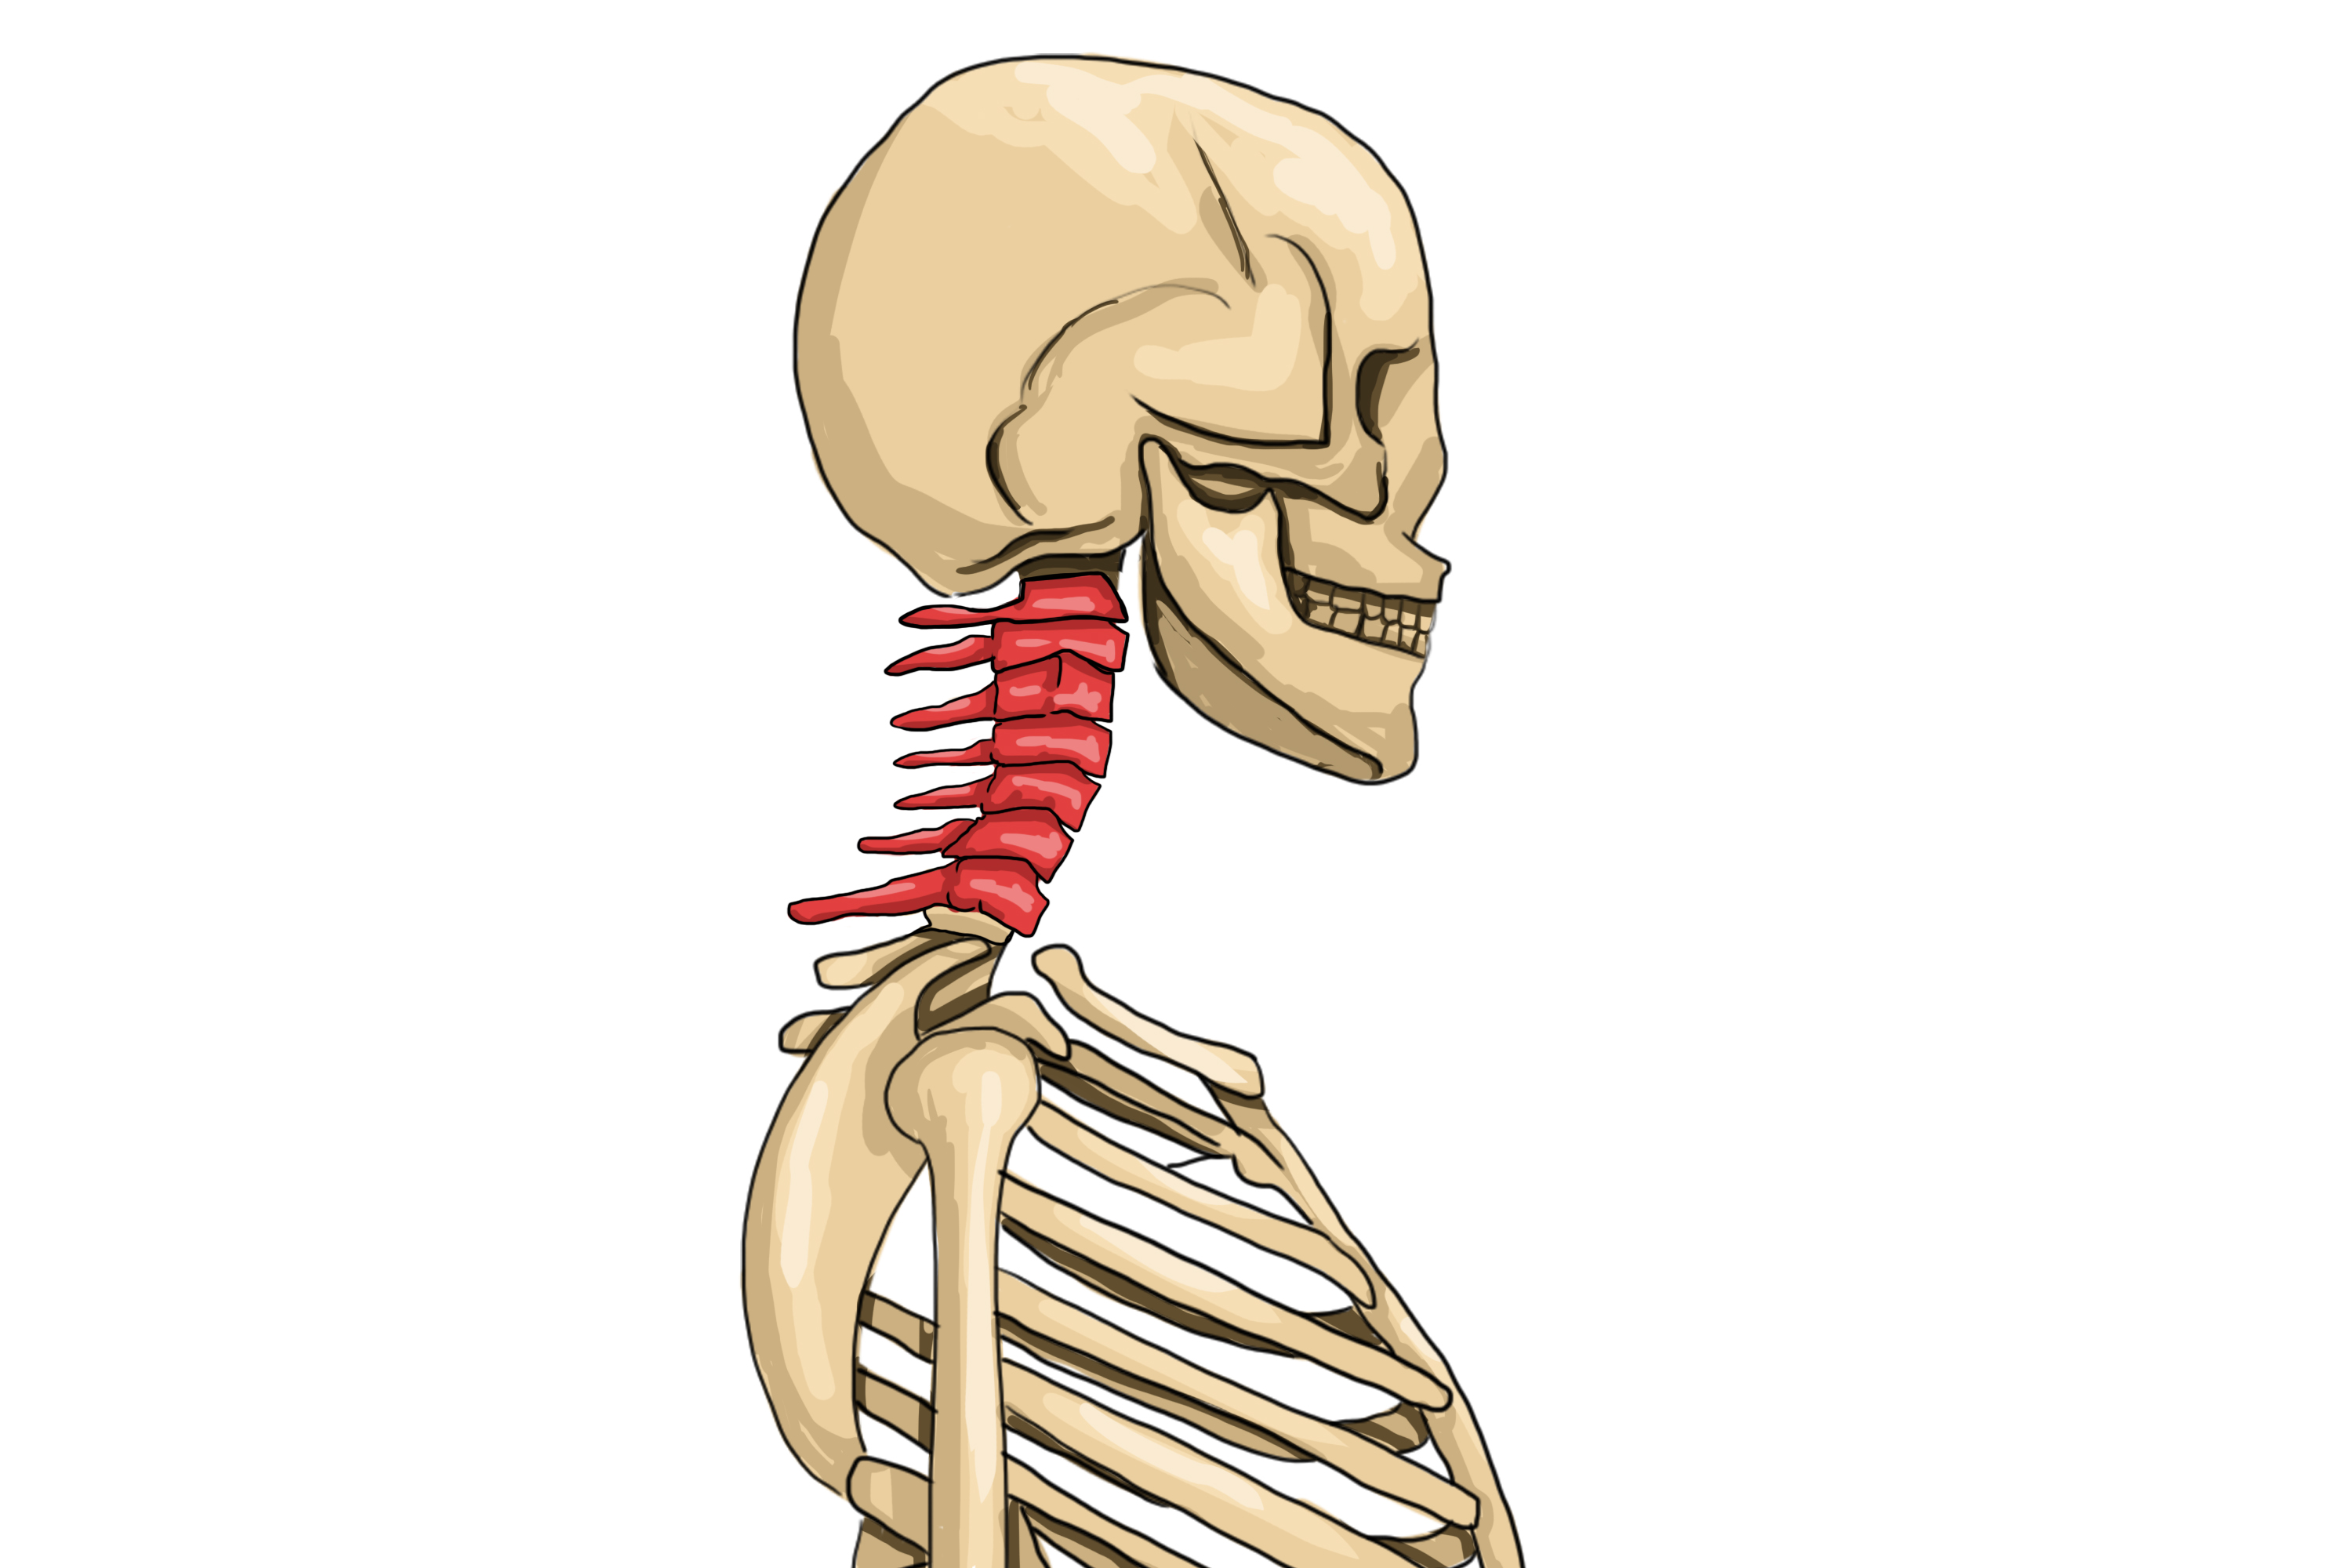 The cervical region is found from the skull 7 vertebrae downwards in the neck